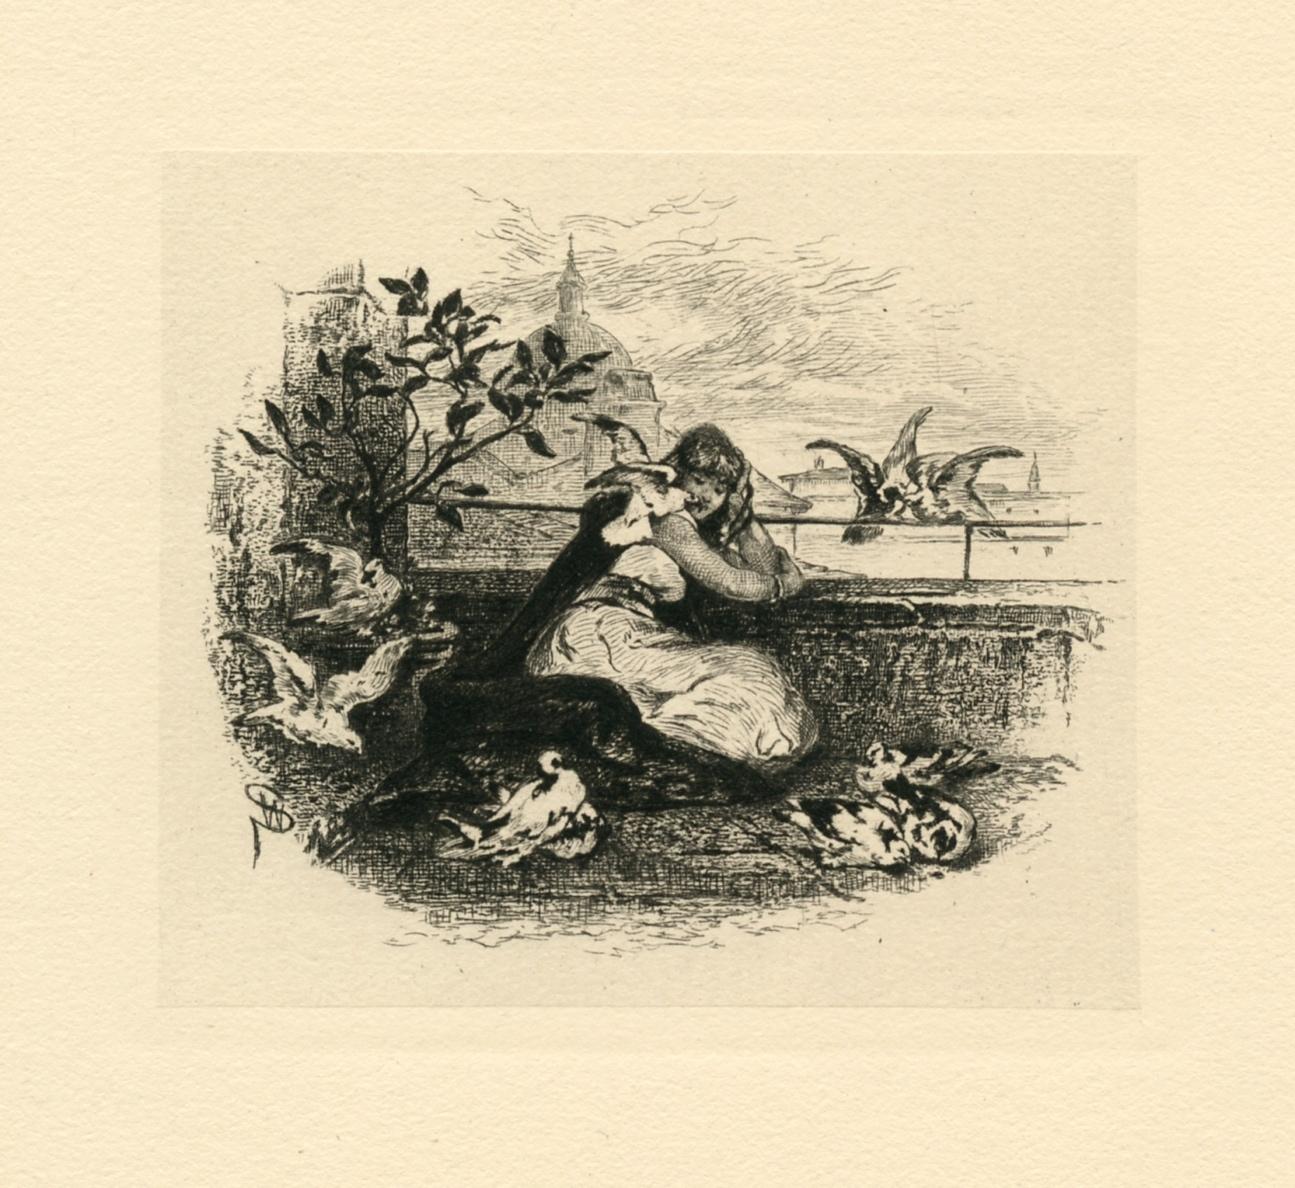 "Hilda and the Doves" original etching - Print by Walter Shirlaw